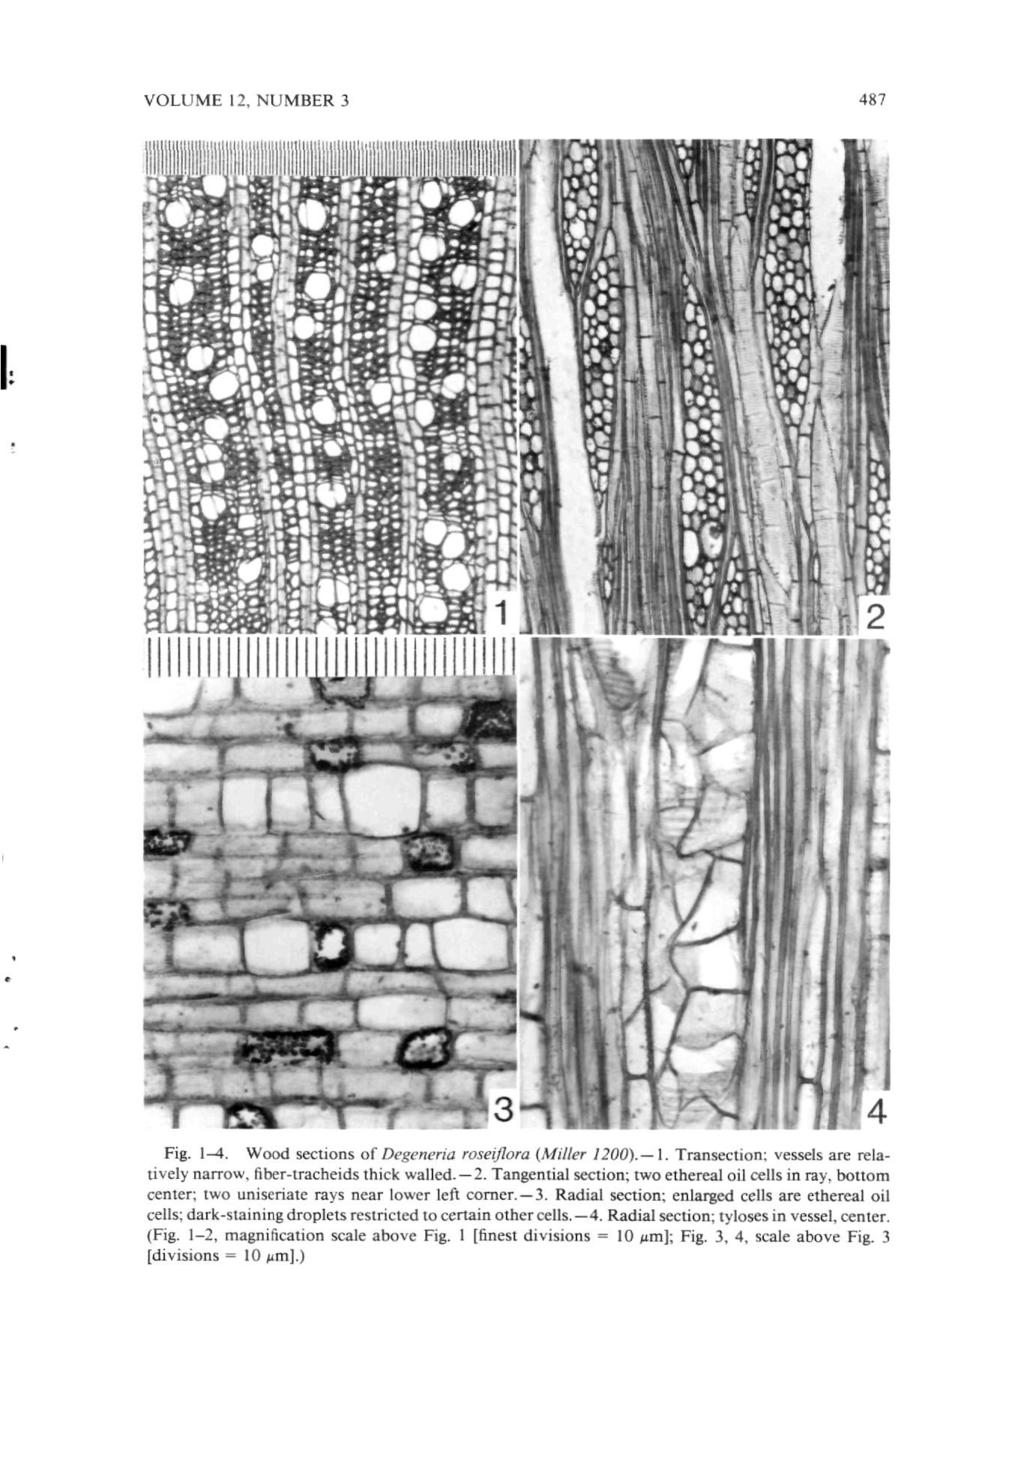 VOLUME 12, NUMBER 3 487 Fig. 1-4. Wood sections of Degeneria roseiflora (Miller 1200). 1. Transection; vessels are relatively narrow, fiber-tracheids thick walled. 2.